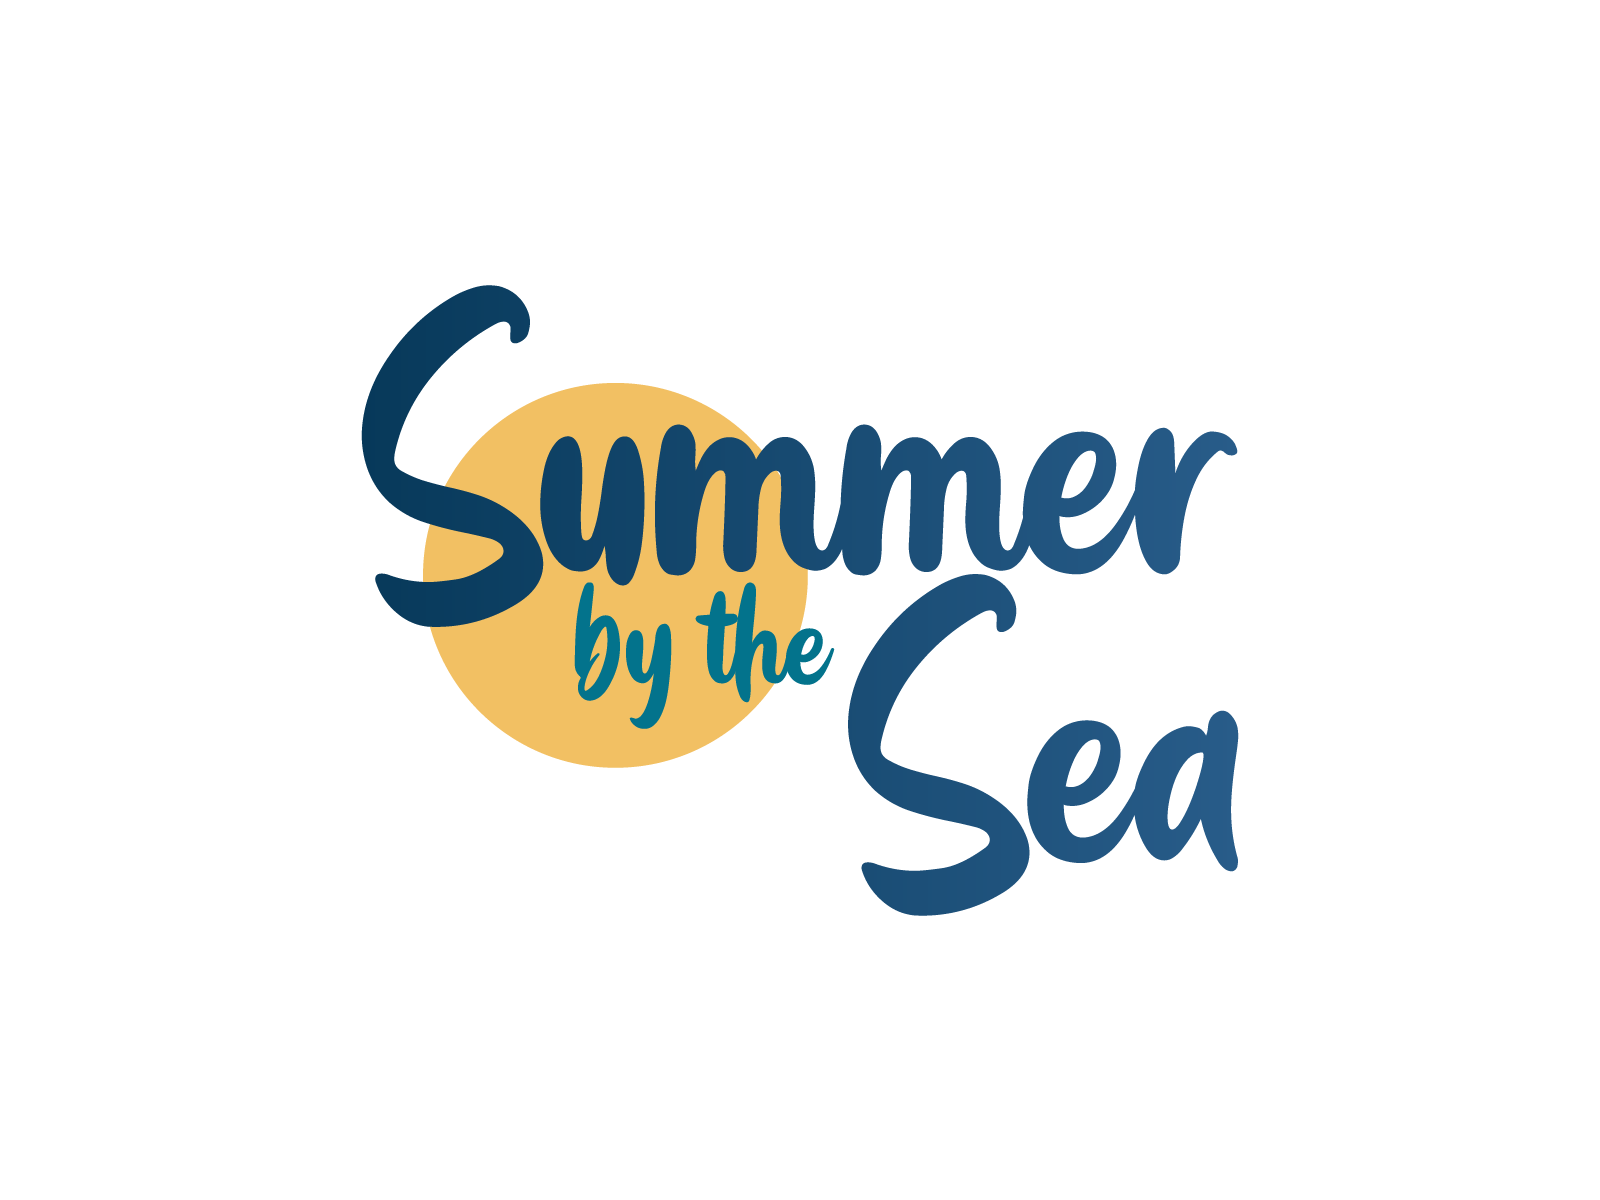 SUMMER BY THE SEA logo concept by Clever Fox Design on Dribbble